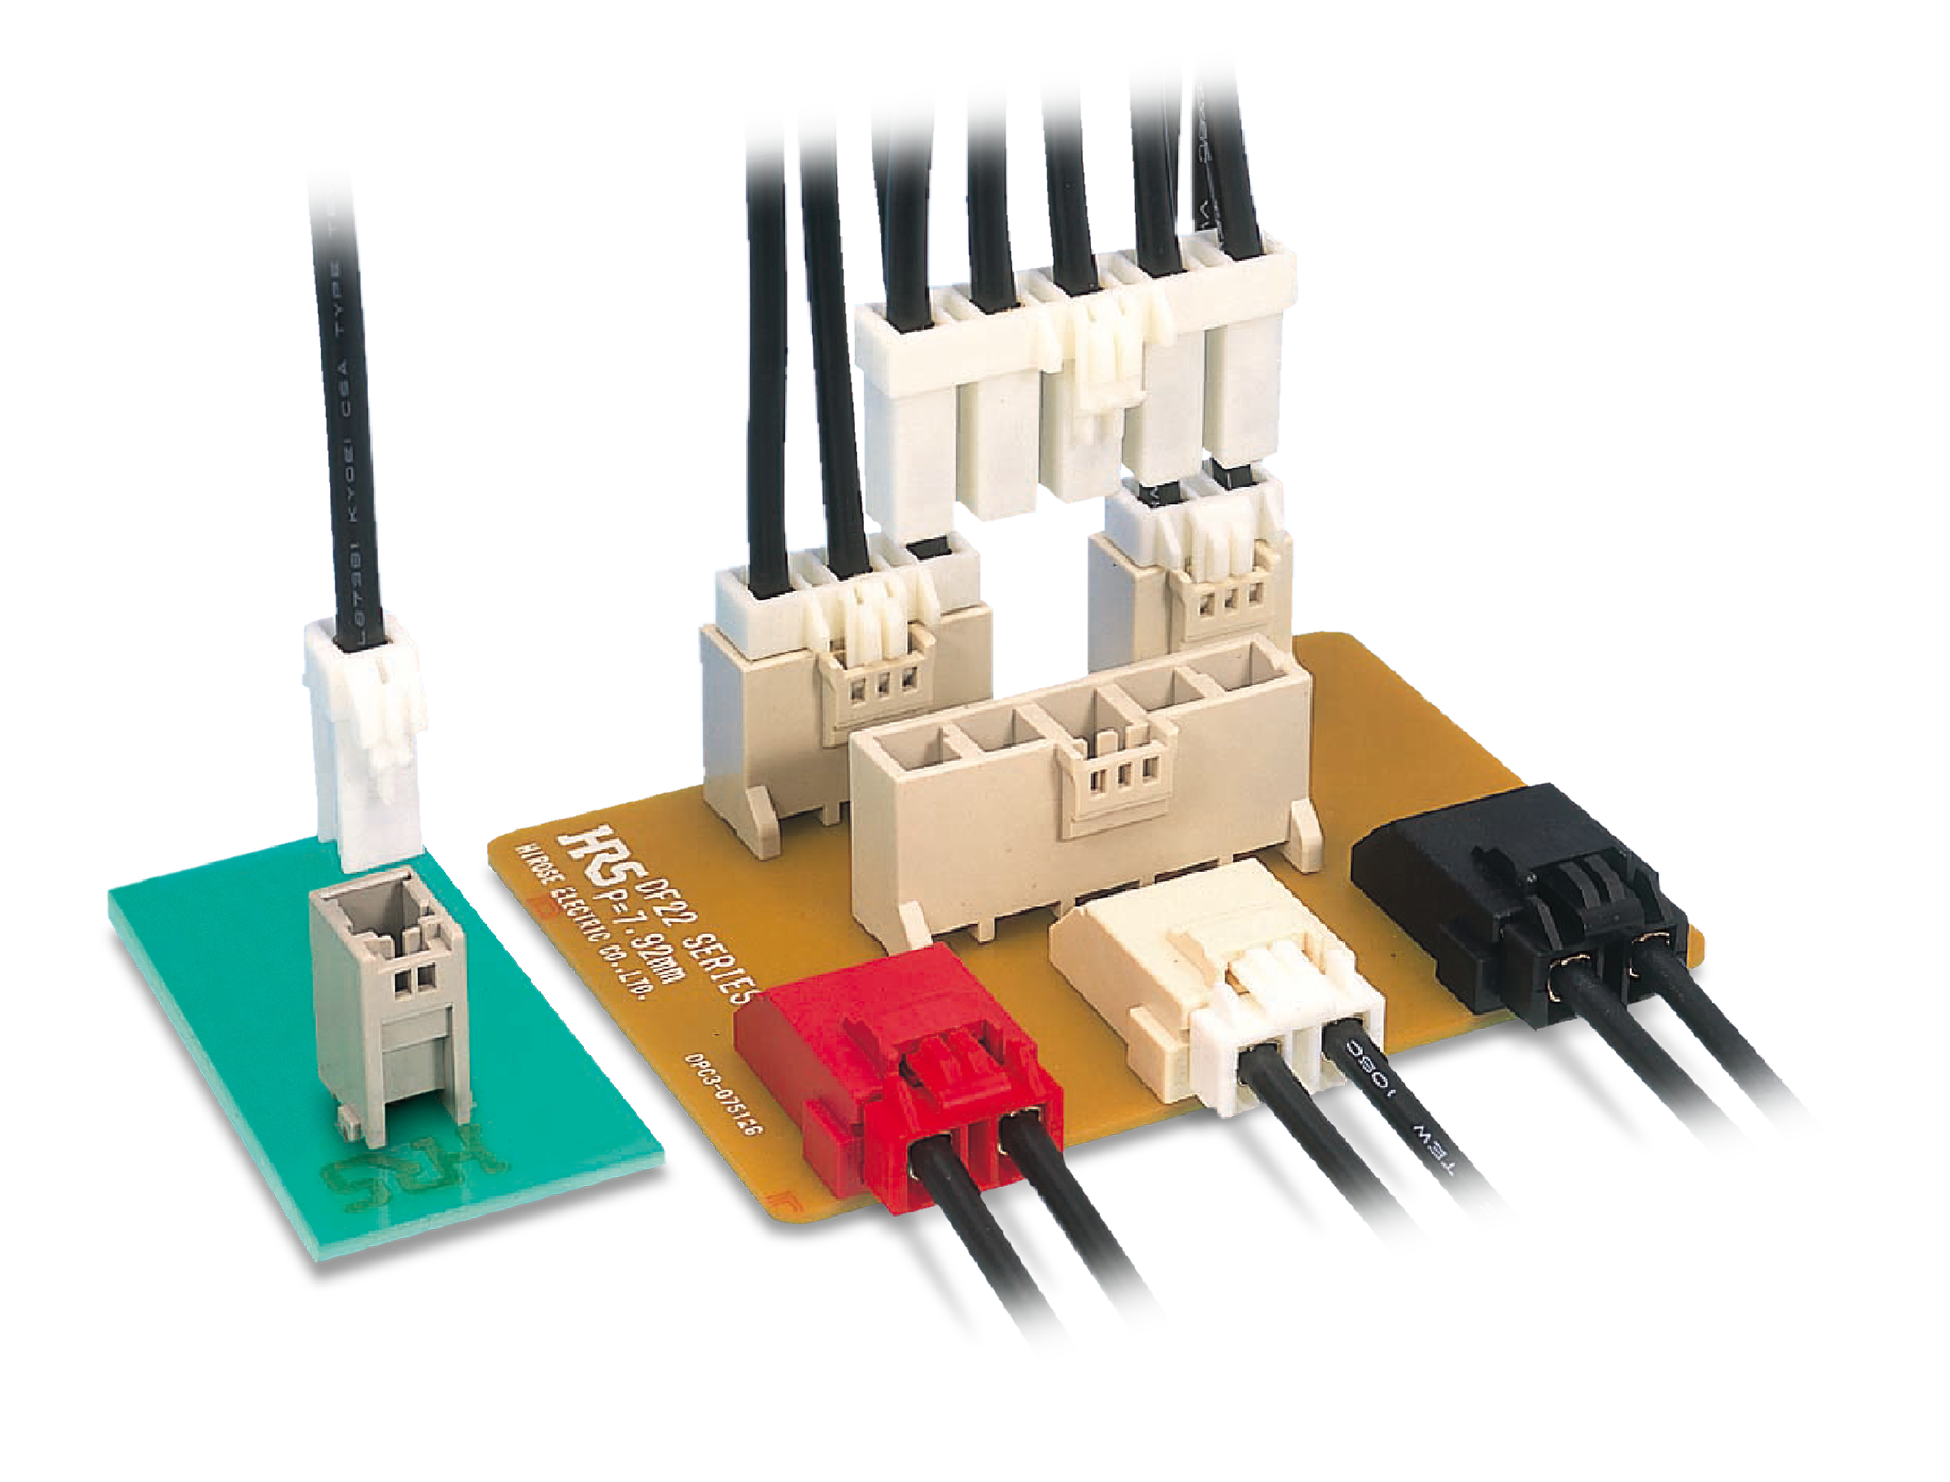 Product | Image of Hiroses DF22 connector, a 4A micro hybrid solution for FPC-to-board connections in micro-mobility applications.